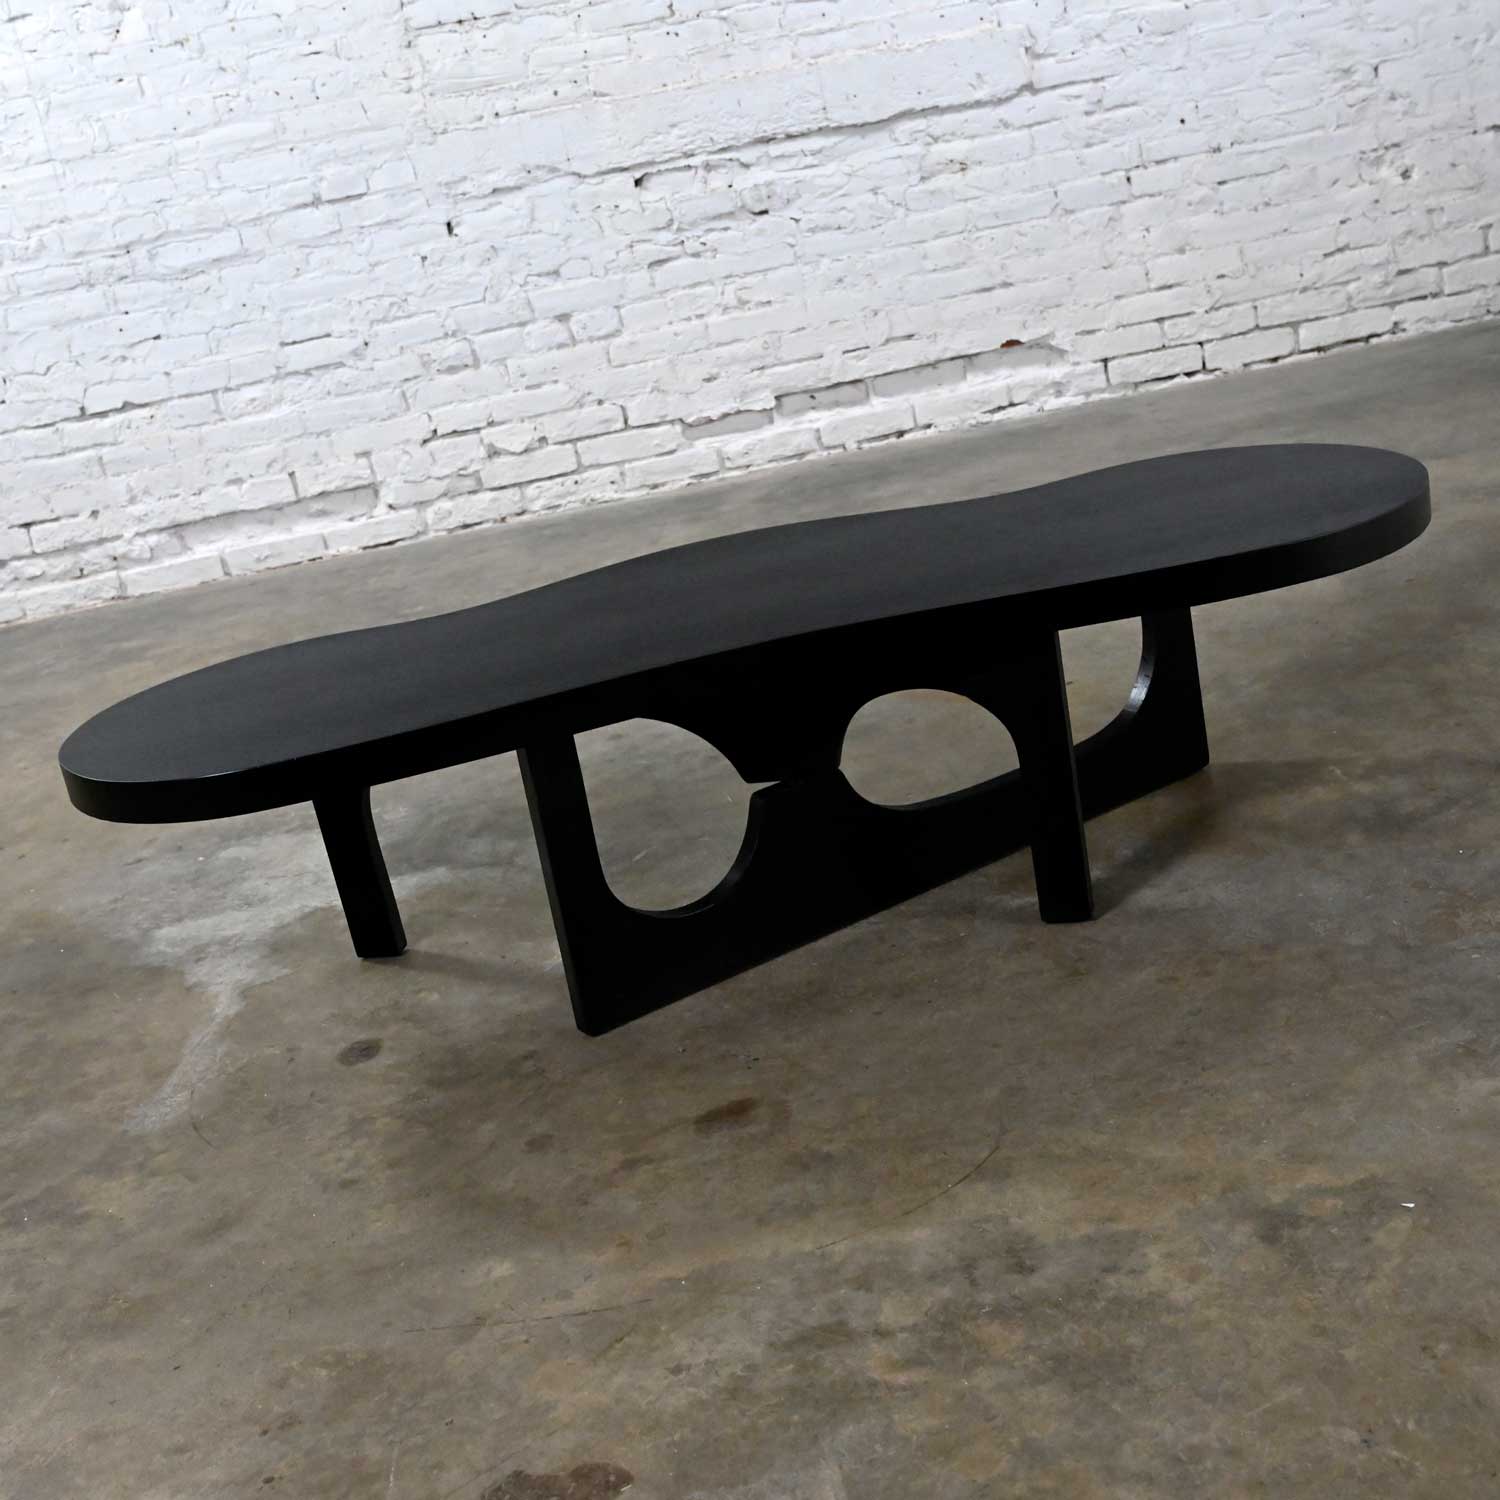 Vintage Mid-Century Modern Biomorphic Wood Coffee Table by Mansion House